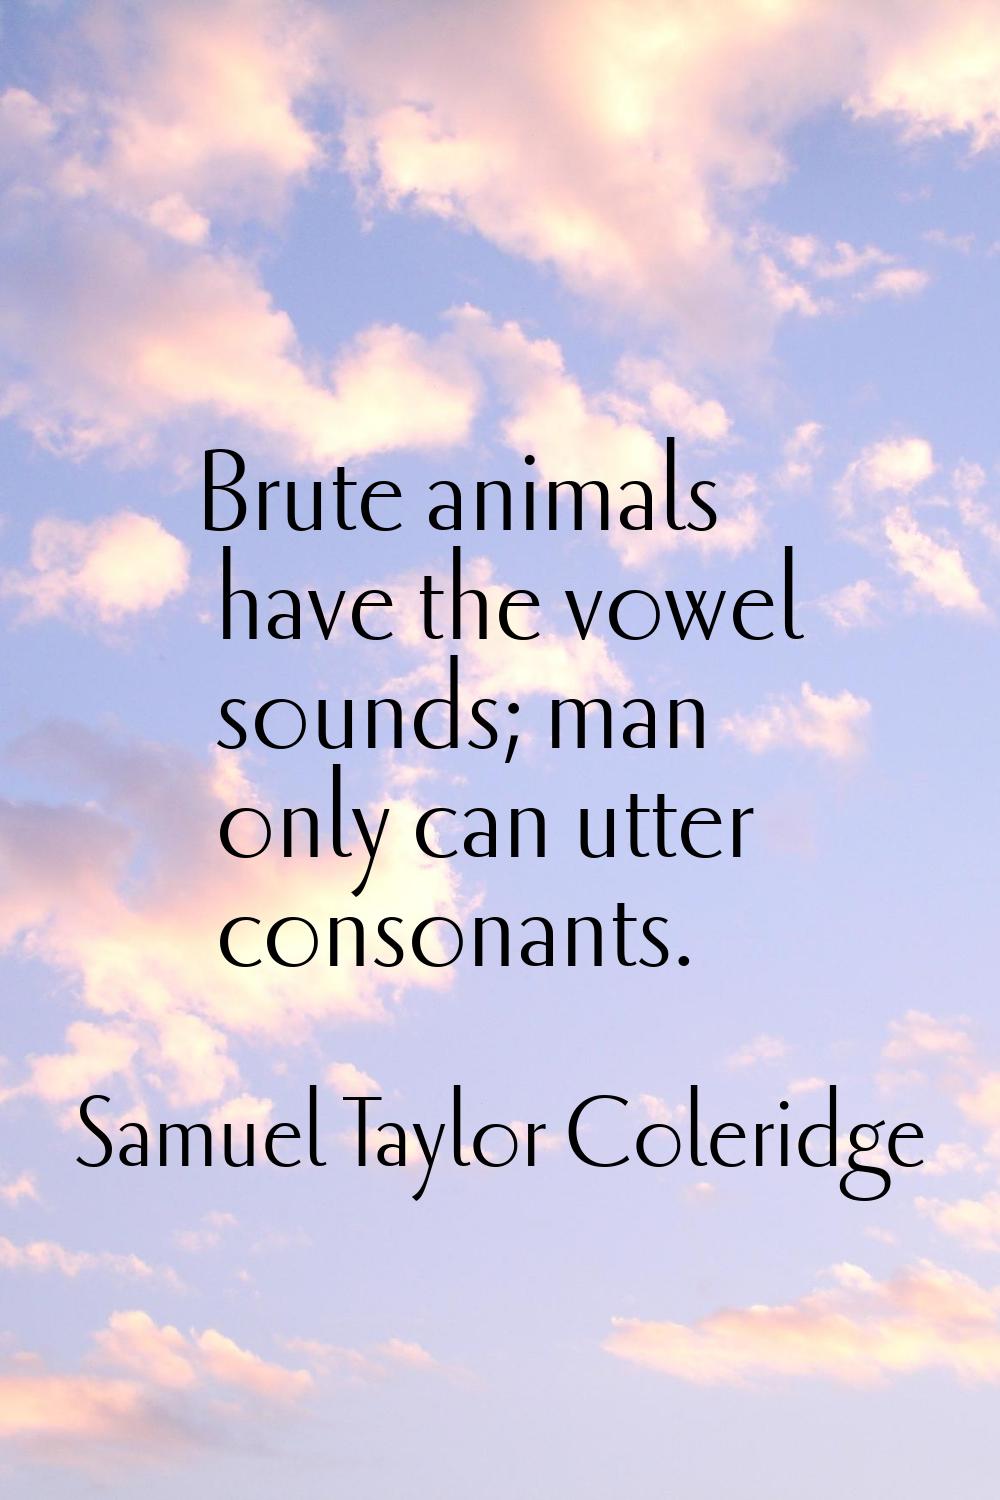 Brute animals have the vowel sounds; man only can utter consonants.